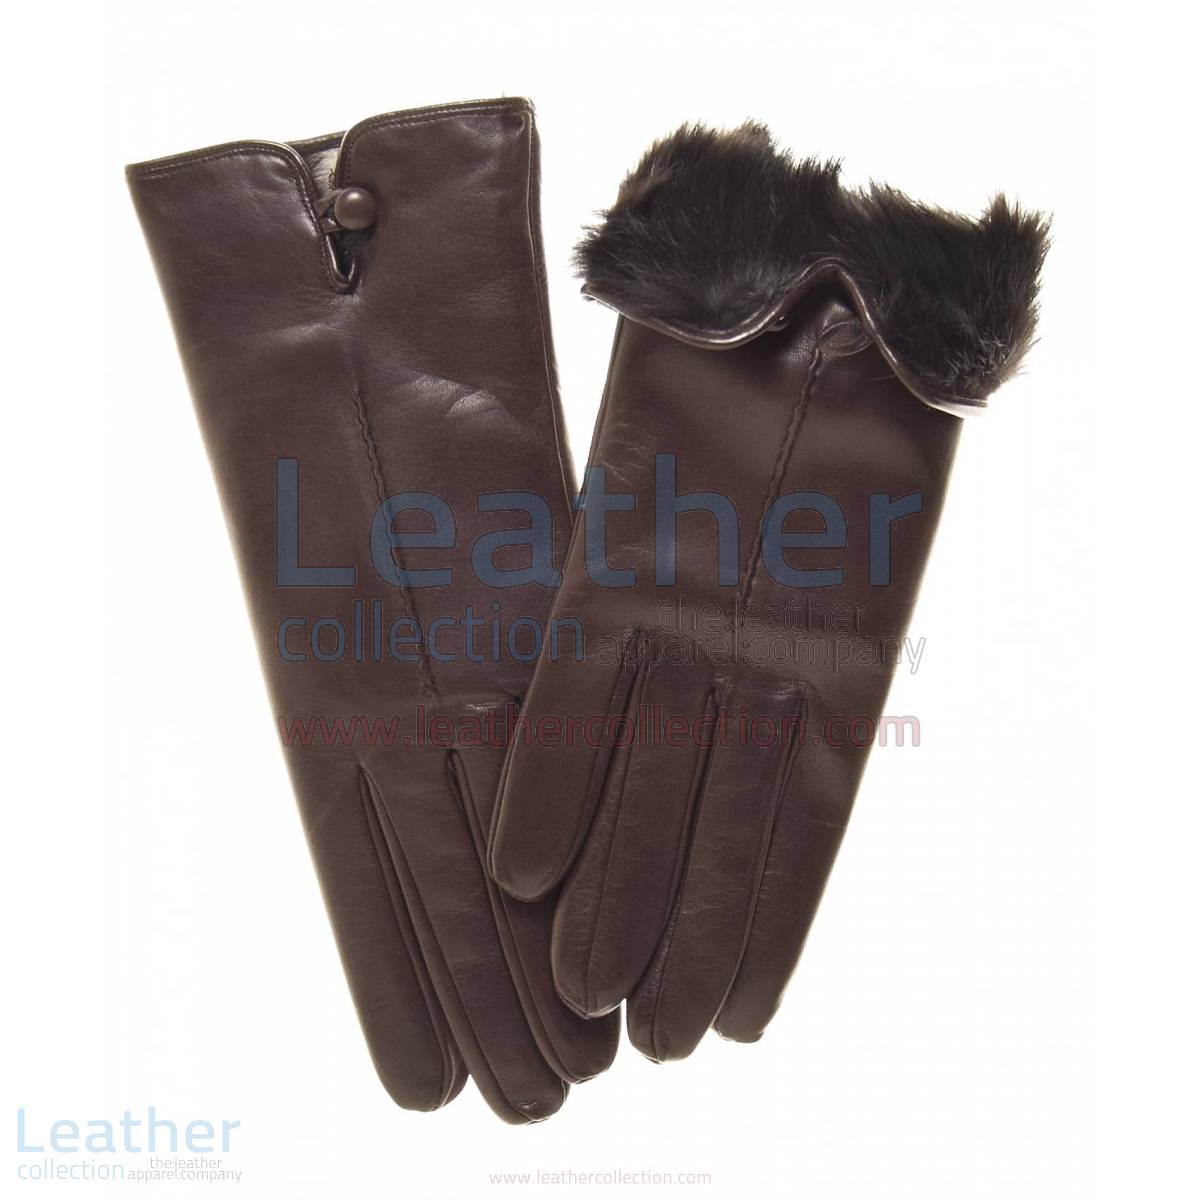 Fur Lined Leather Gloves